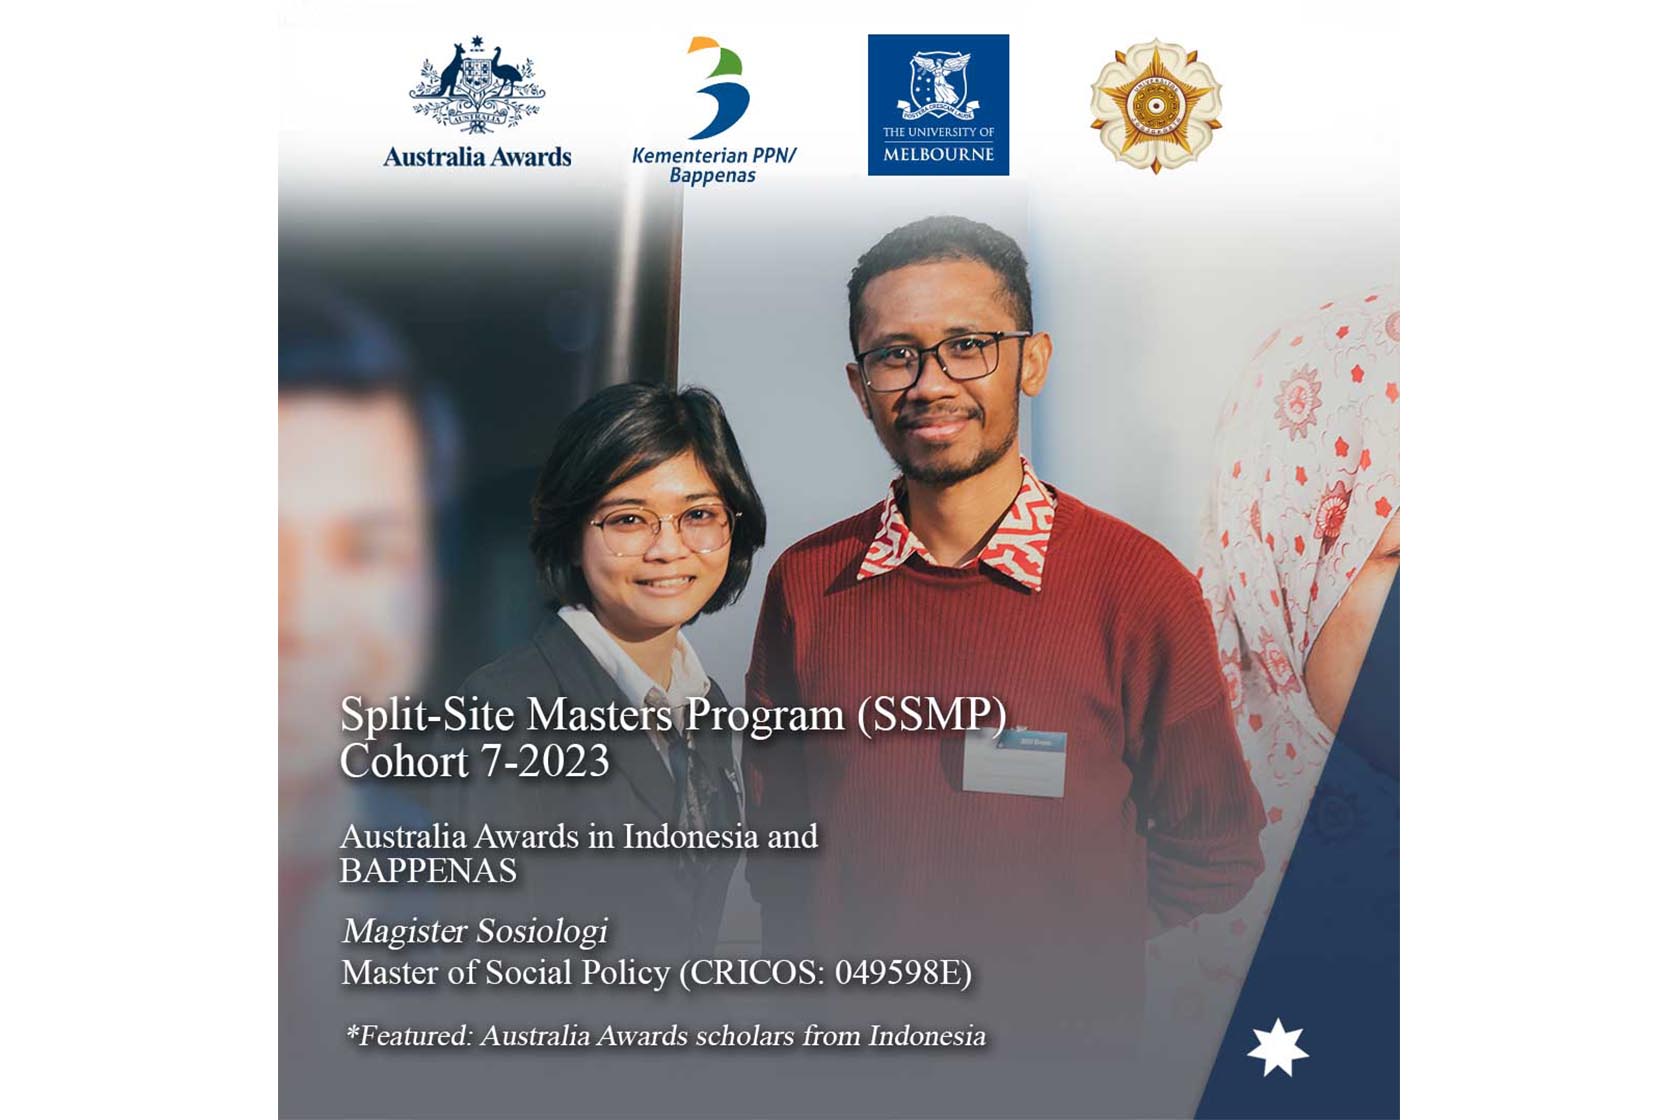 Poster featuring Australia Awards scholars from Indonesia, smiling and inviting Indonesian civil servants to apply for the Split-site Masters Program.